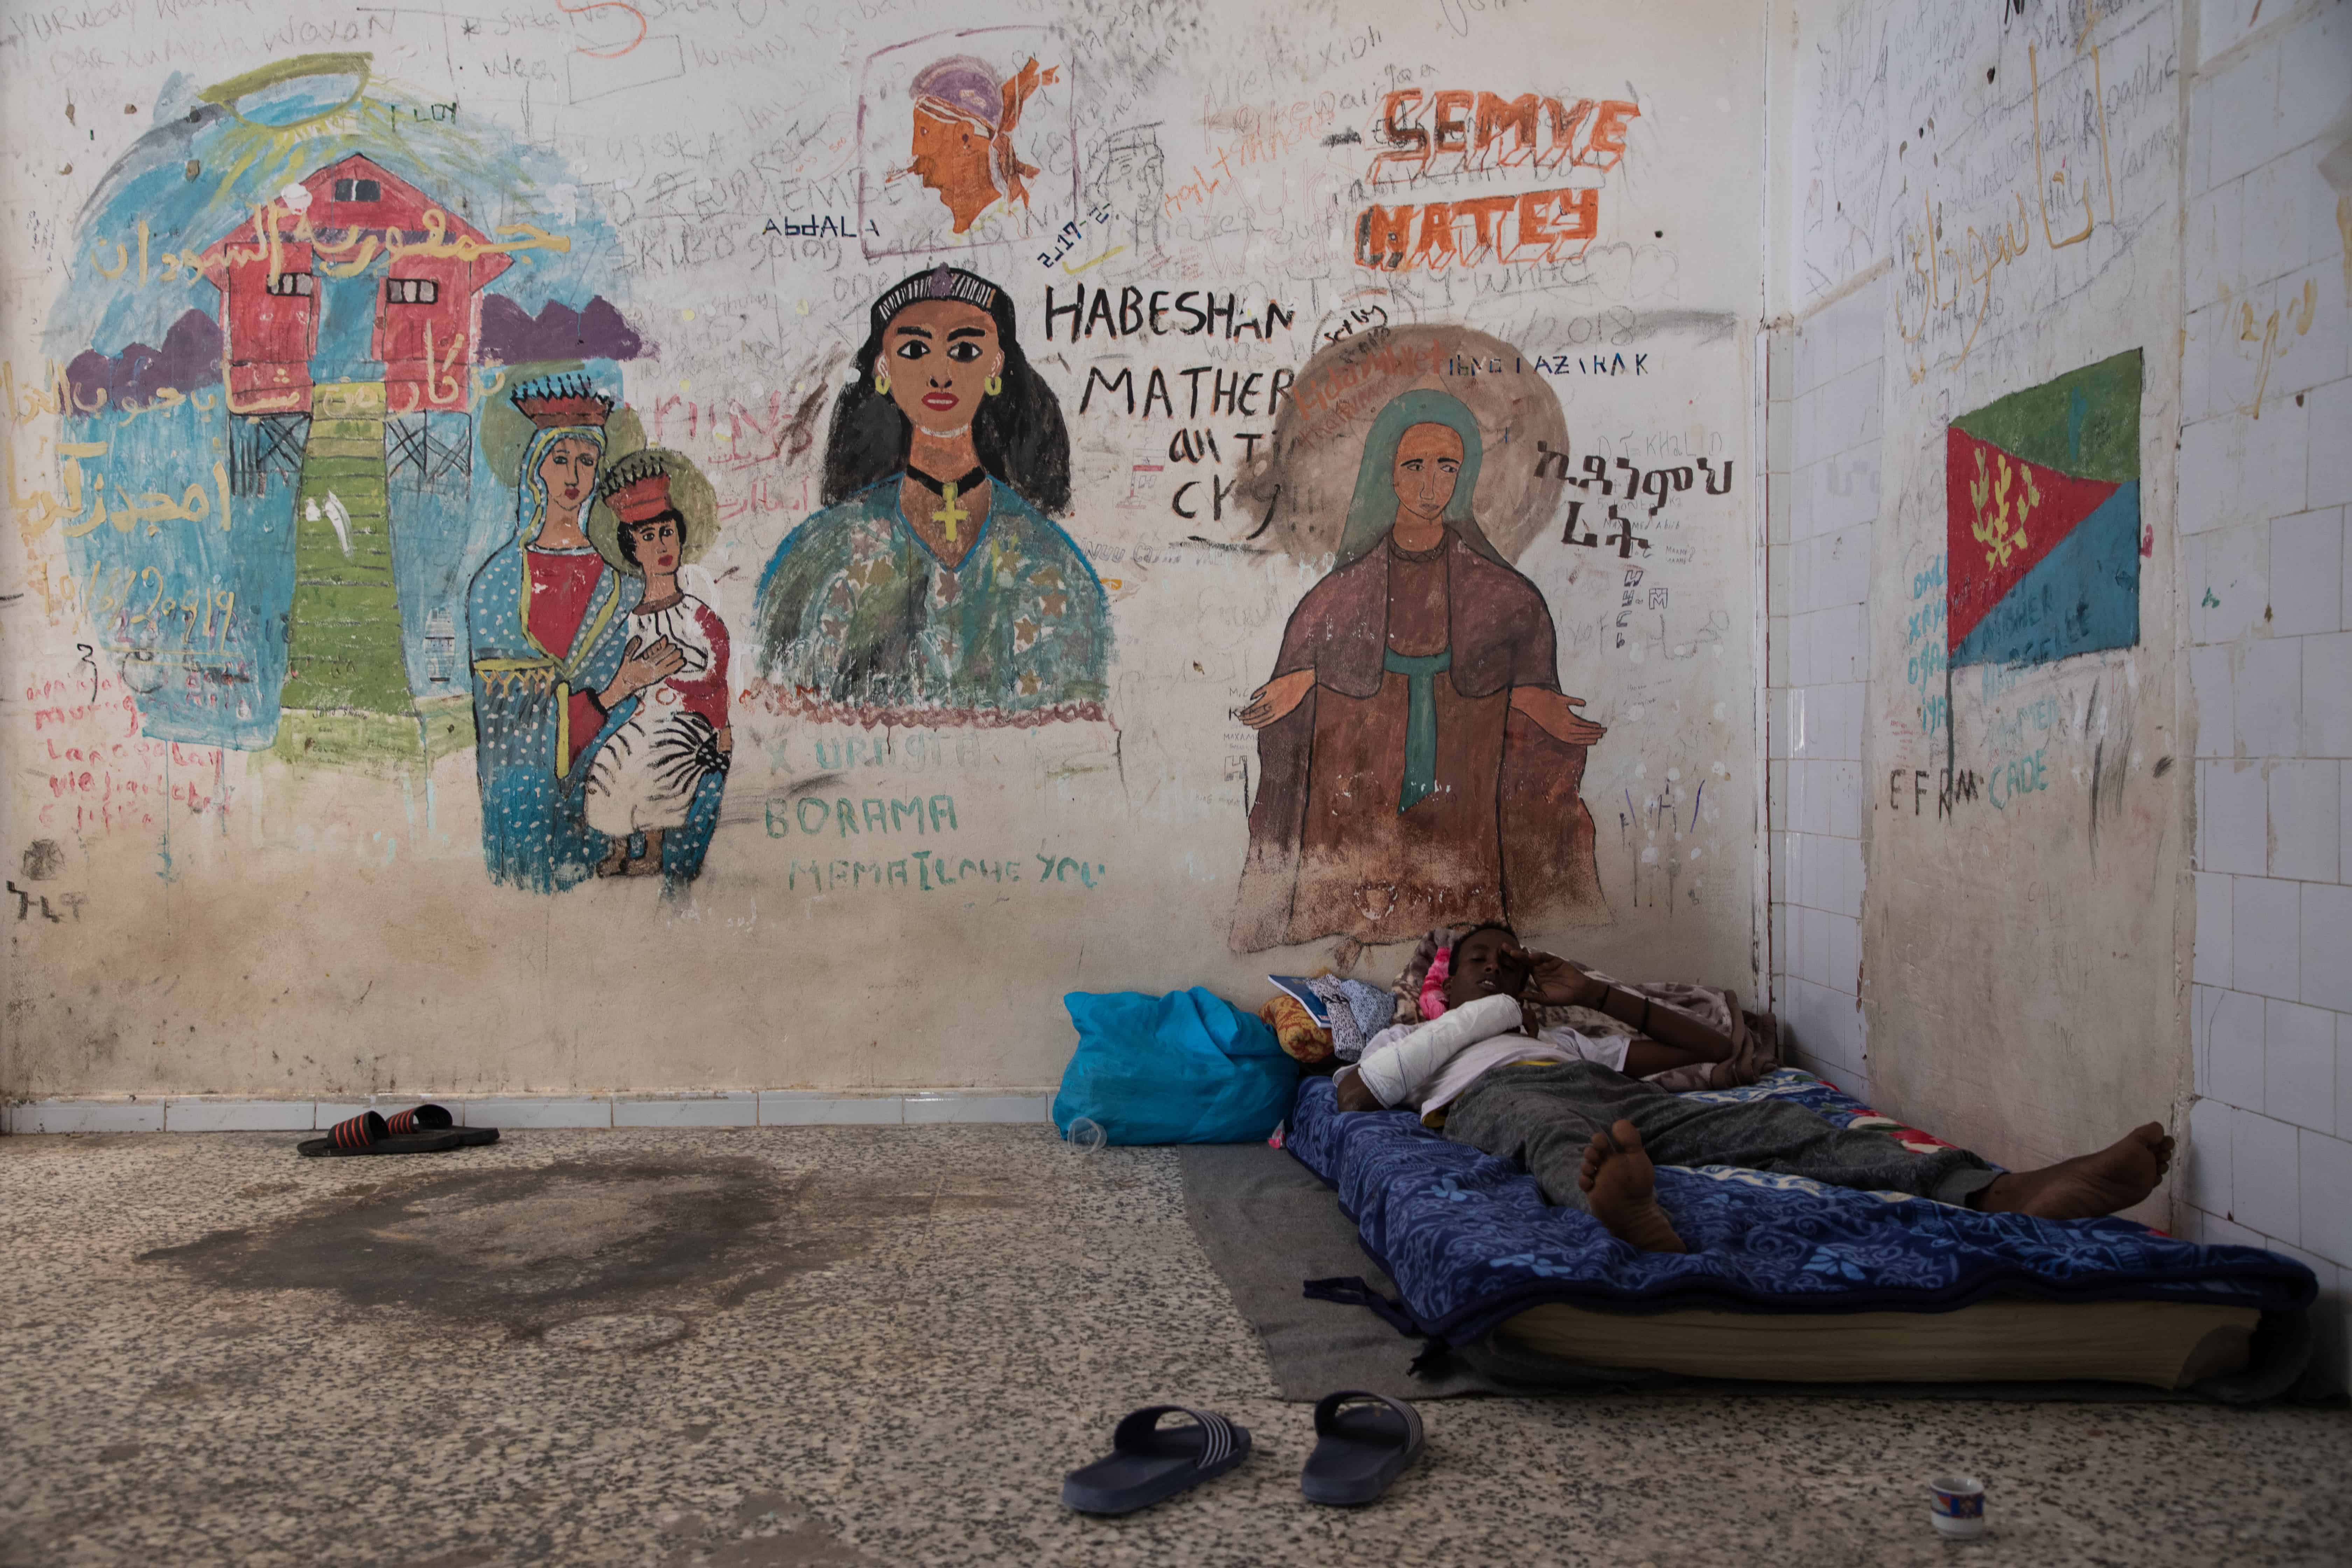 A man gets some rest in the Souq Al-Khamis detention centre, located by the sea in the city of Khoms. Libya, October 2019.
© AURELIE BAUMEL/MSF